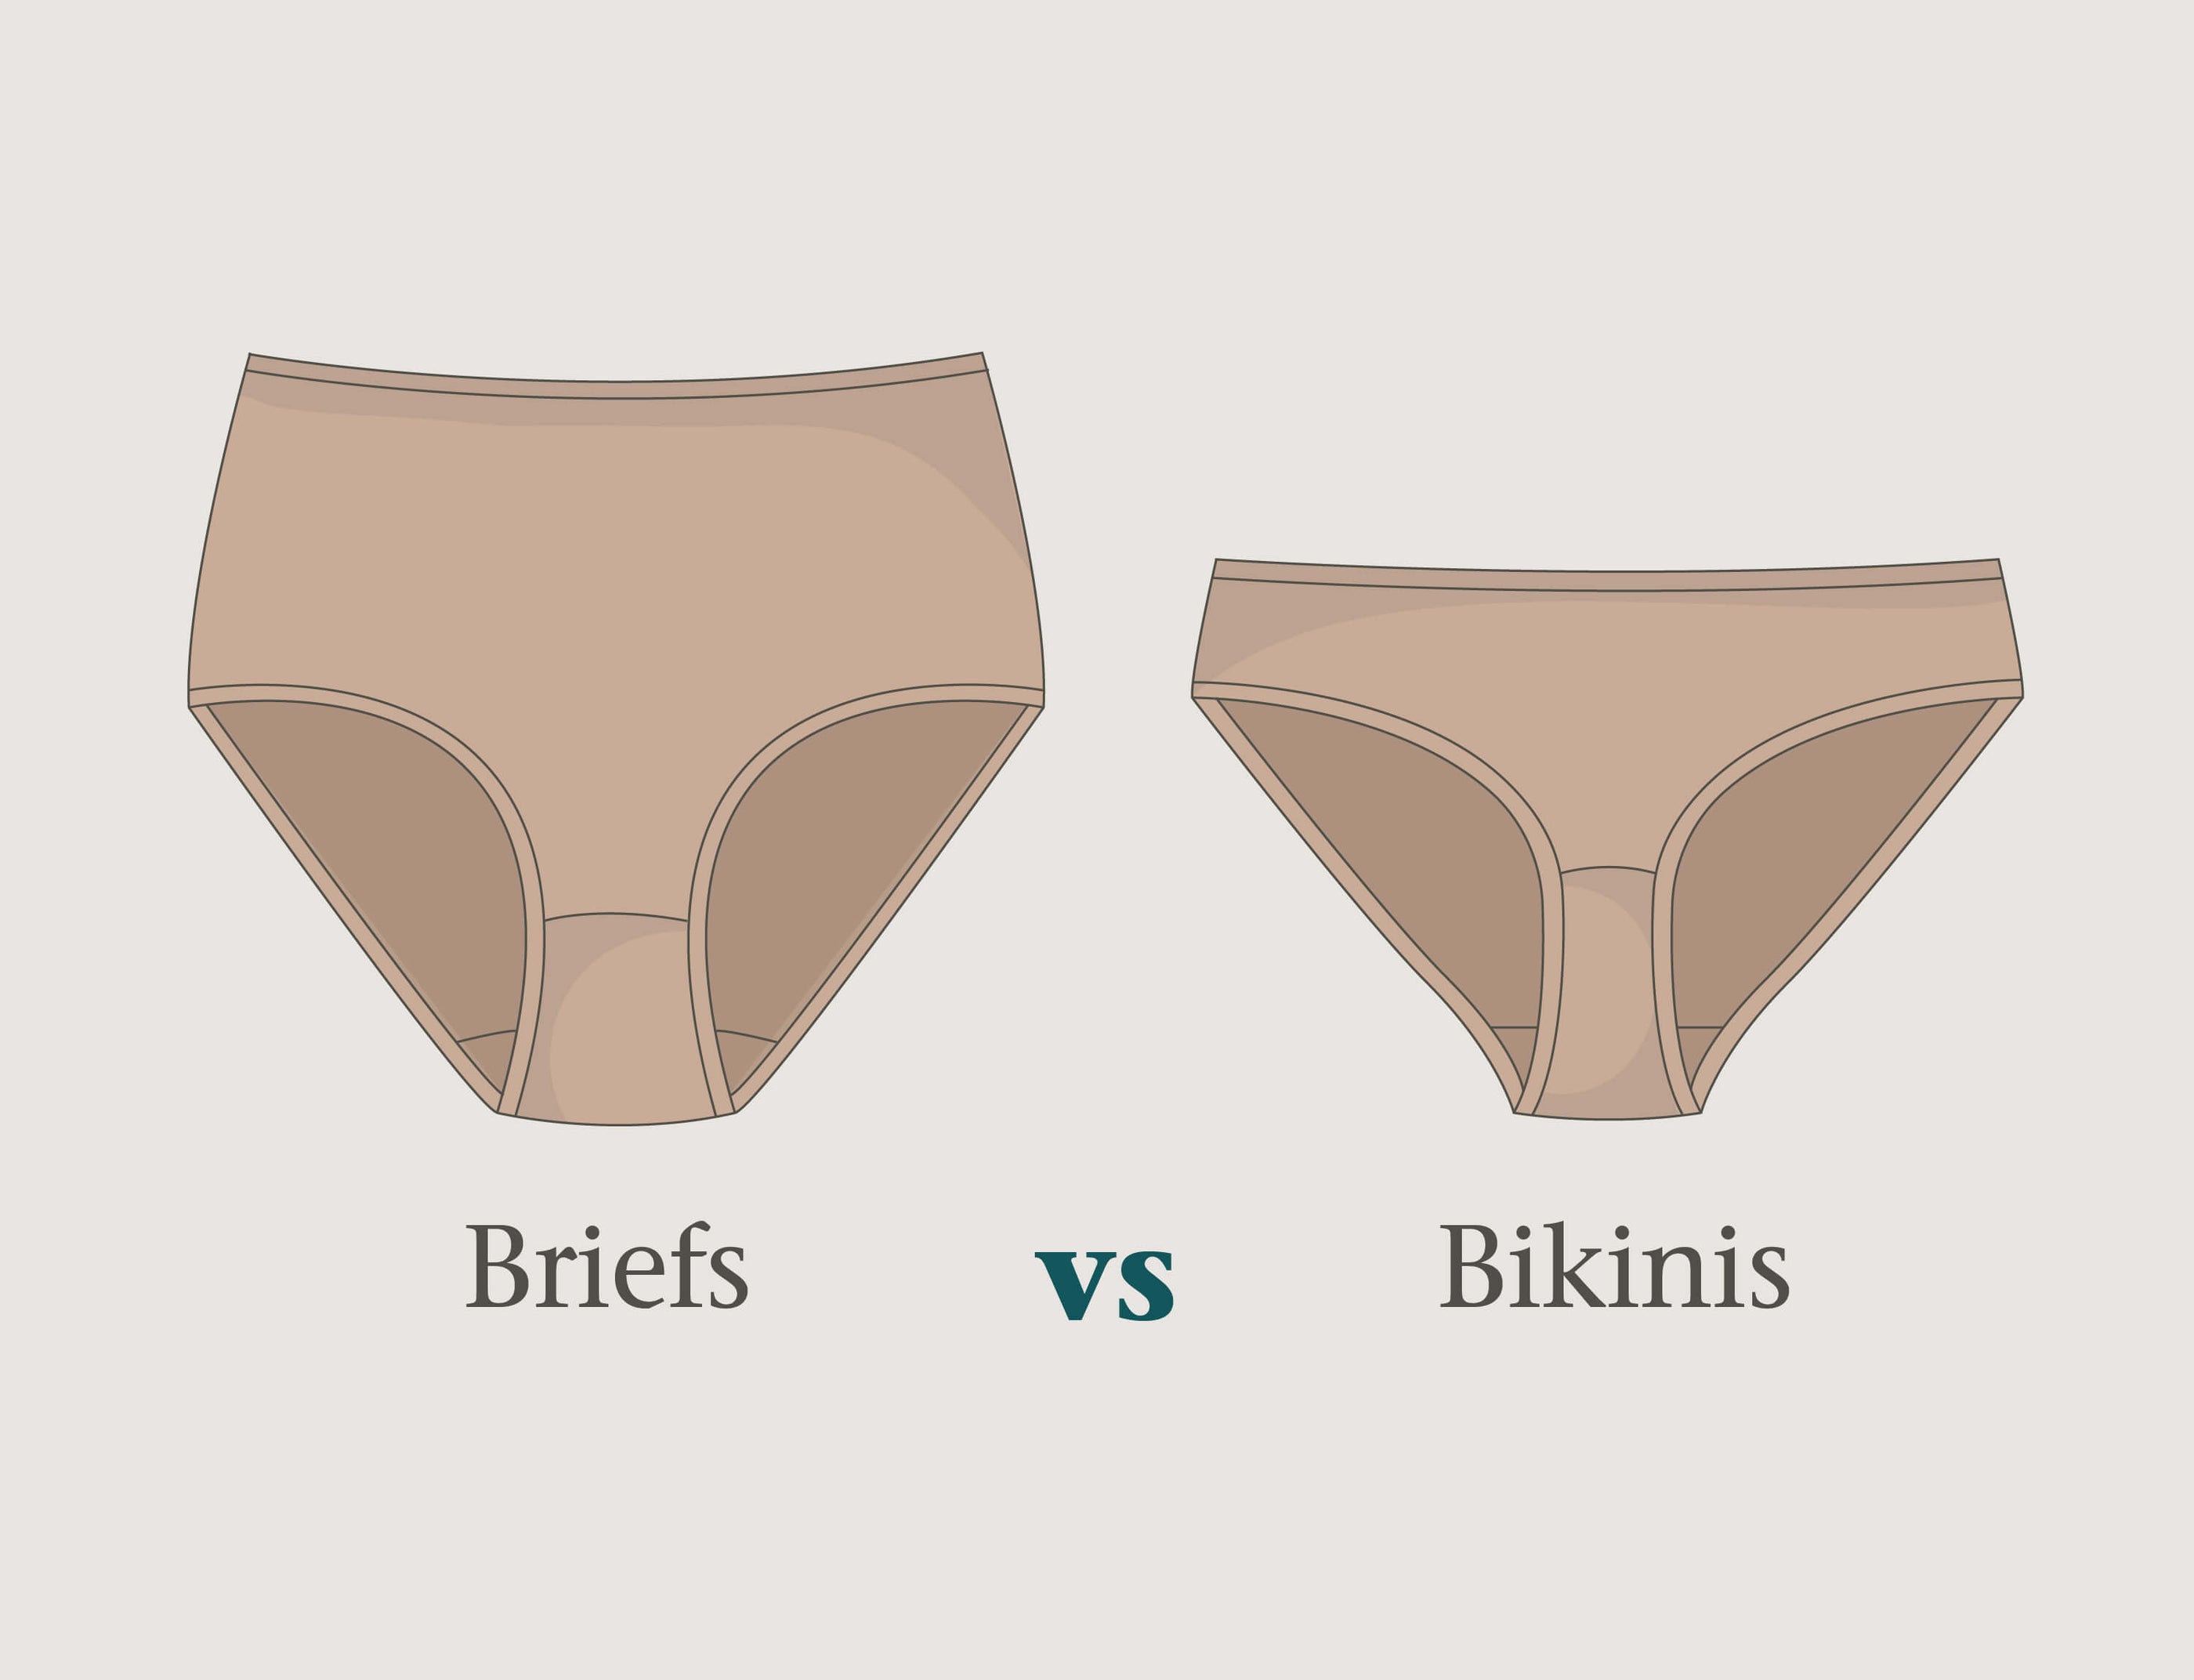 WHICH MEN'S LACE UNDERWEAR STYLE IS BETTER FOR ME?